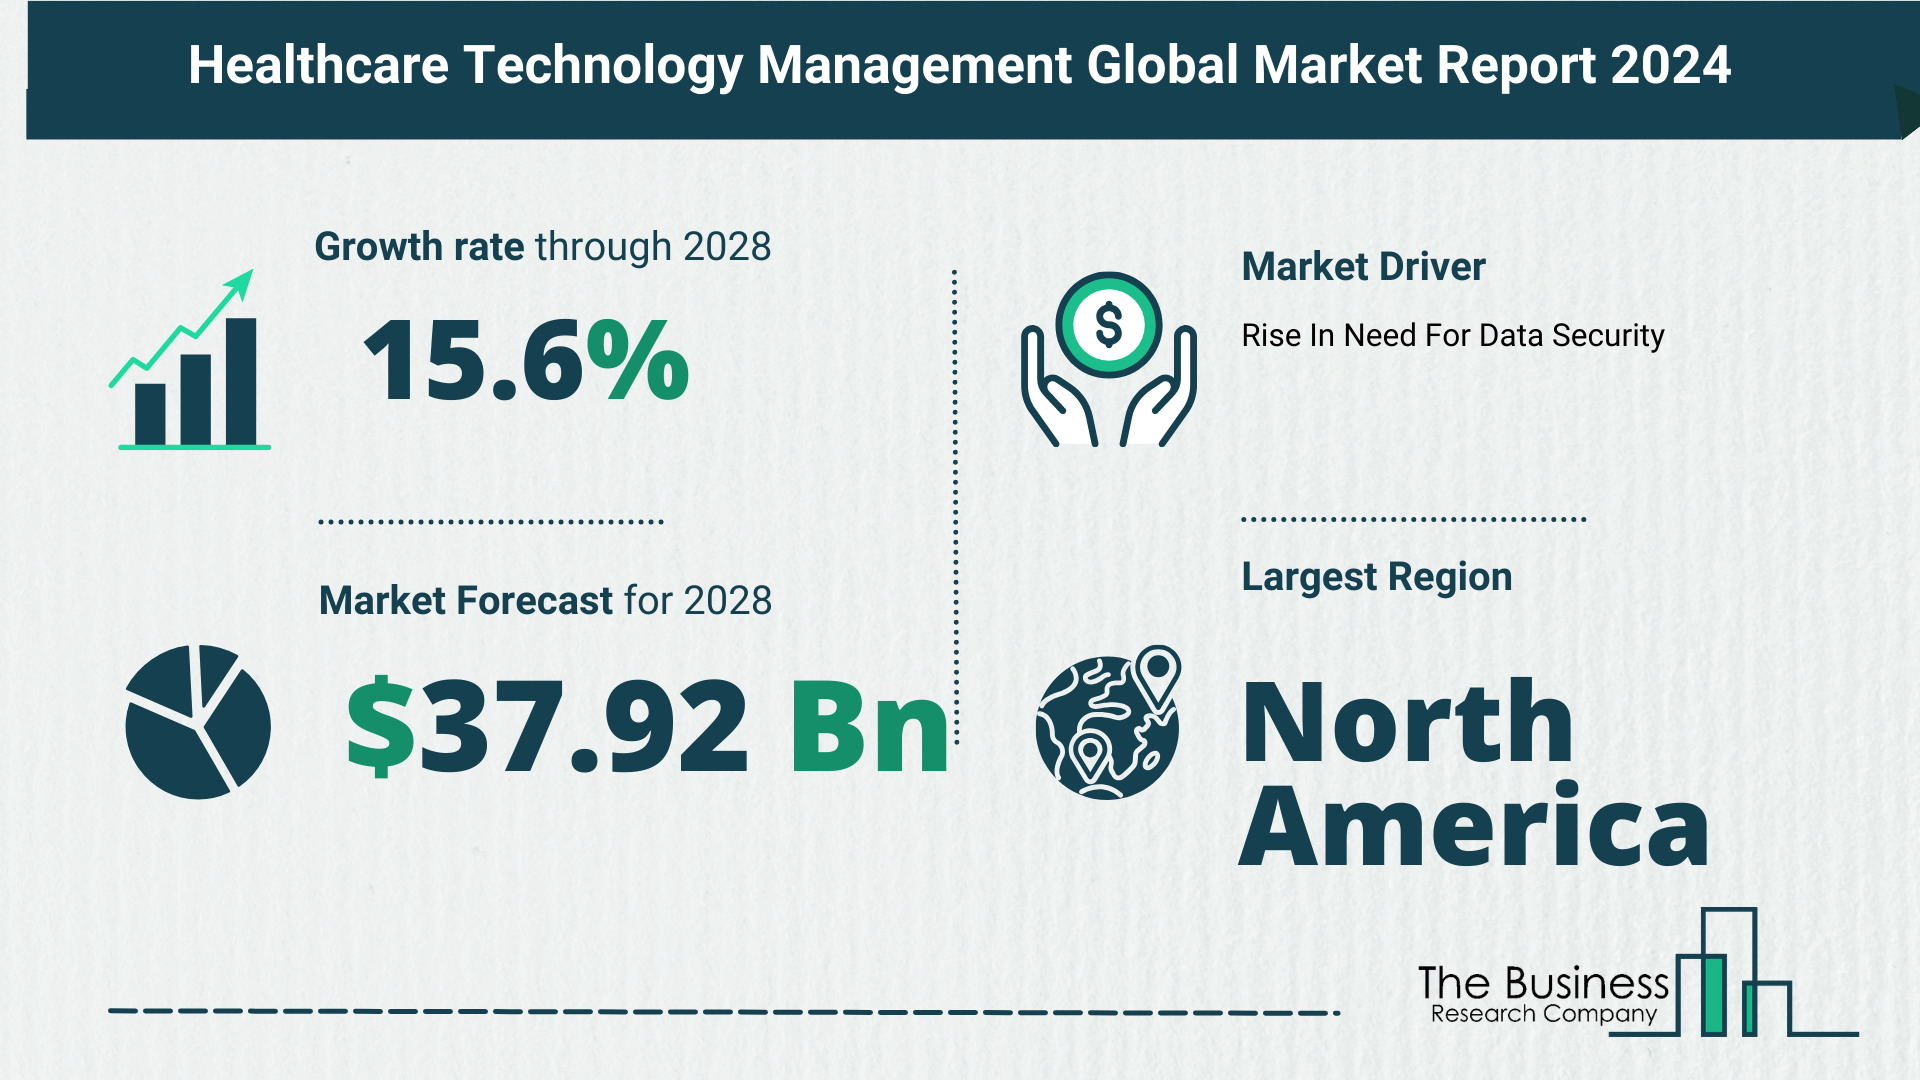 How Is The Healthcare Technology Management Market Expected To Grow Through 2024-2033